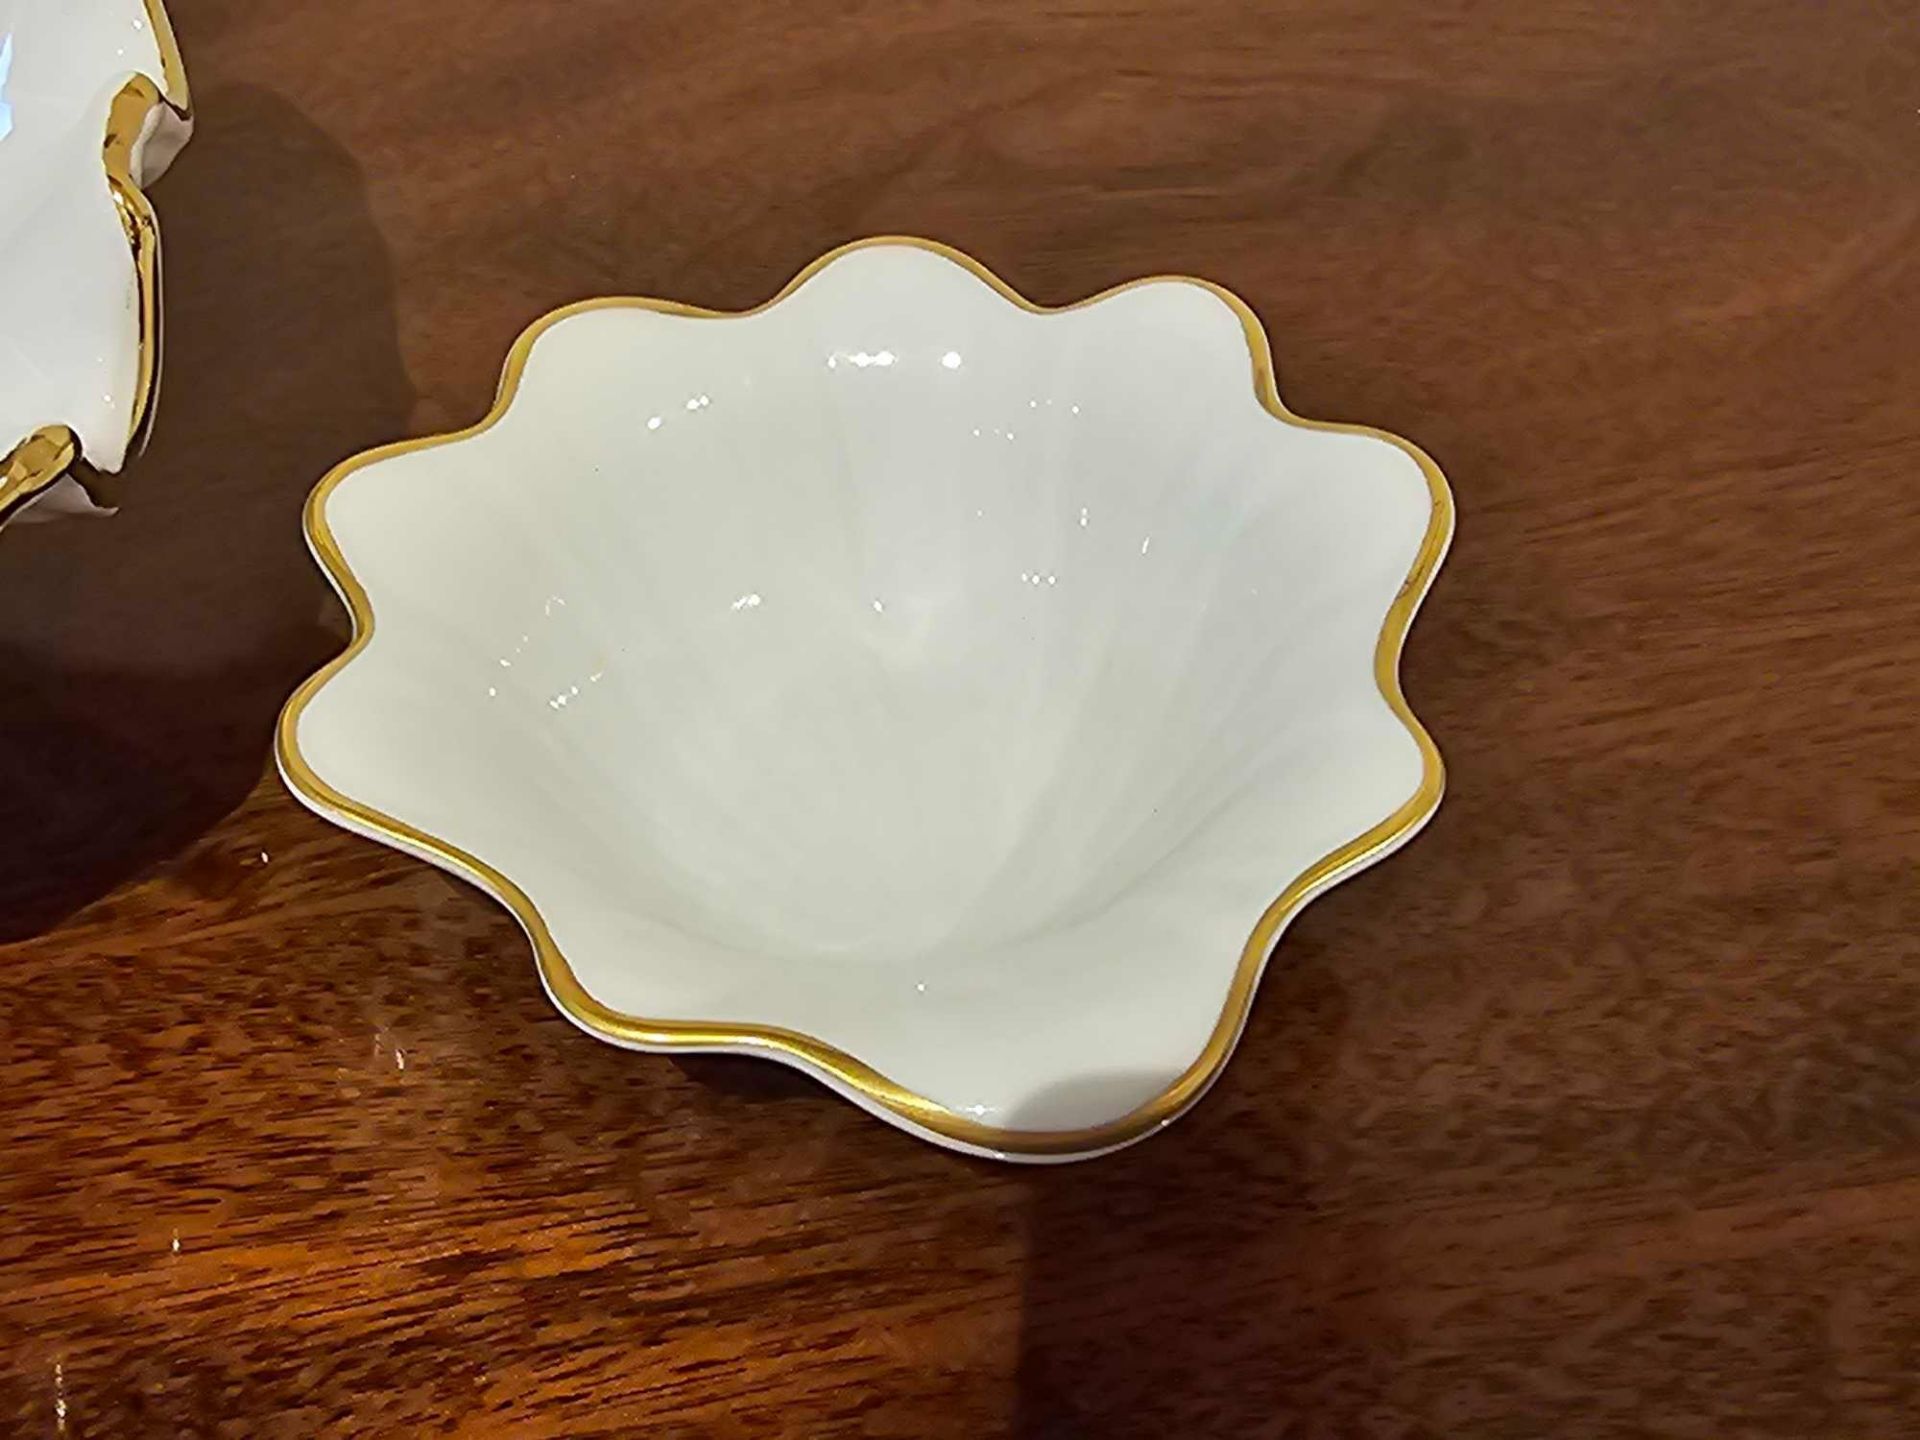 Martan Portugal 704 Shaped White And Gold Dish And A Royal Worcester Porcelain White And Gold Shaped - Image 3 of 3